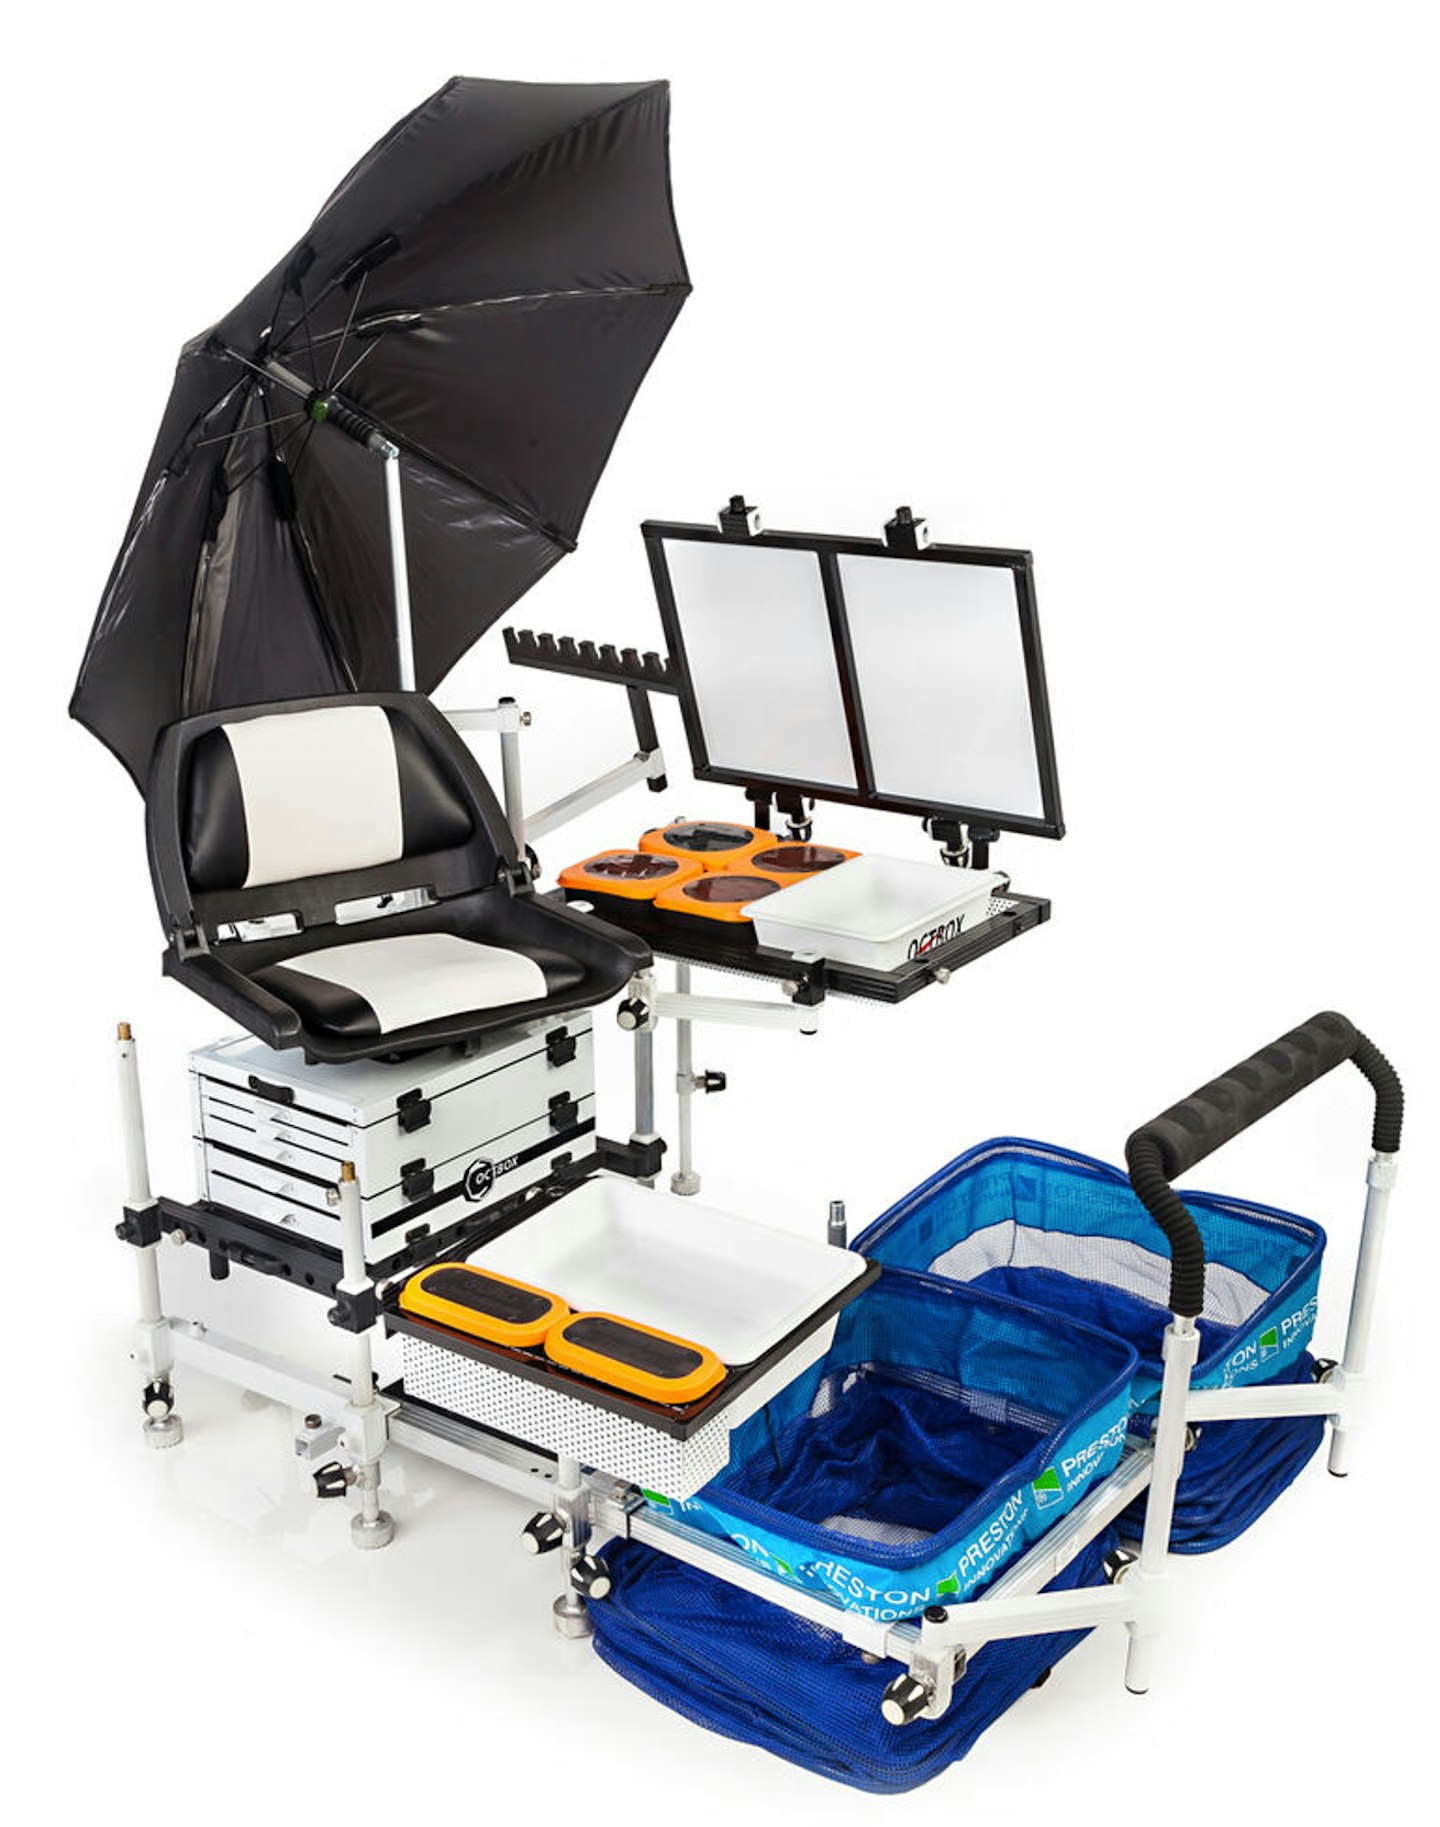 The seatbox re-invented by Octbox